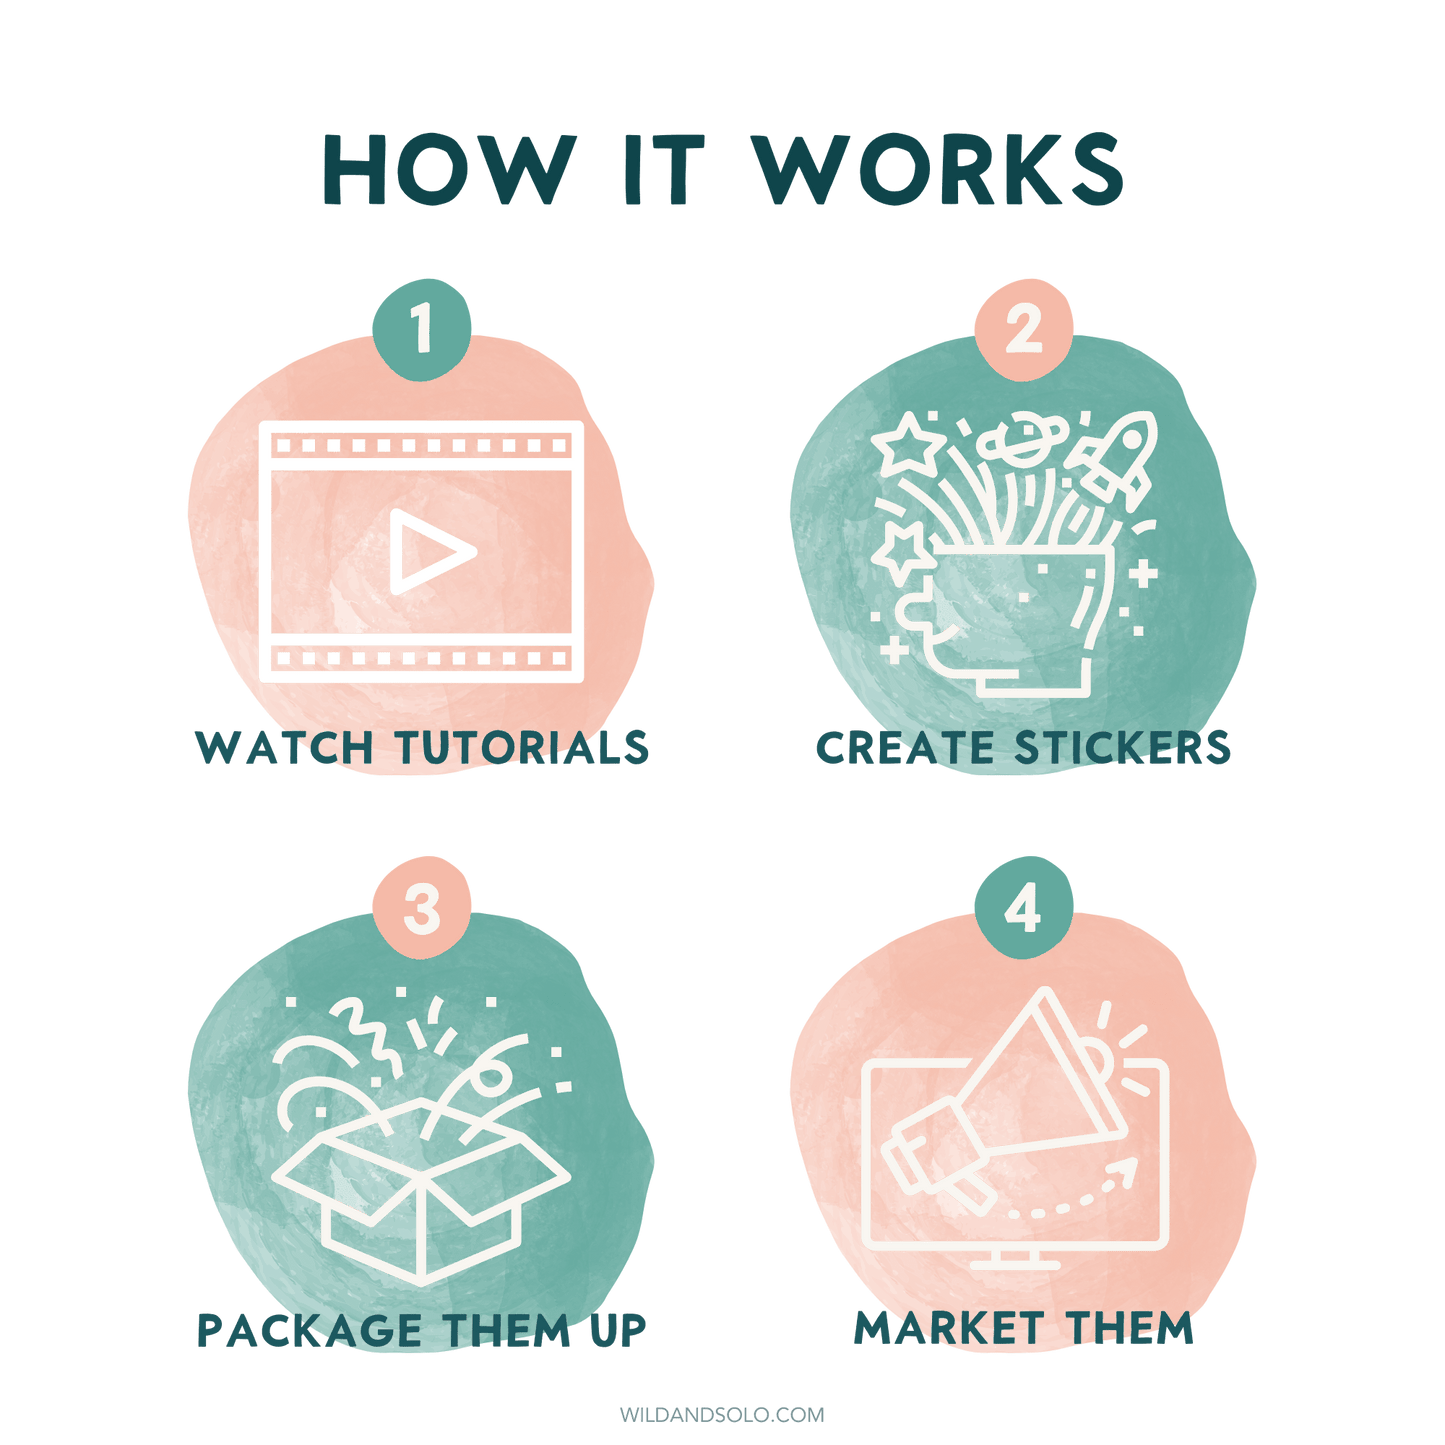 Creating Digital Stickers Course